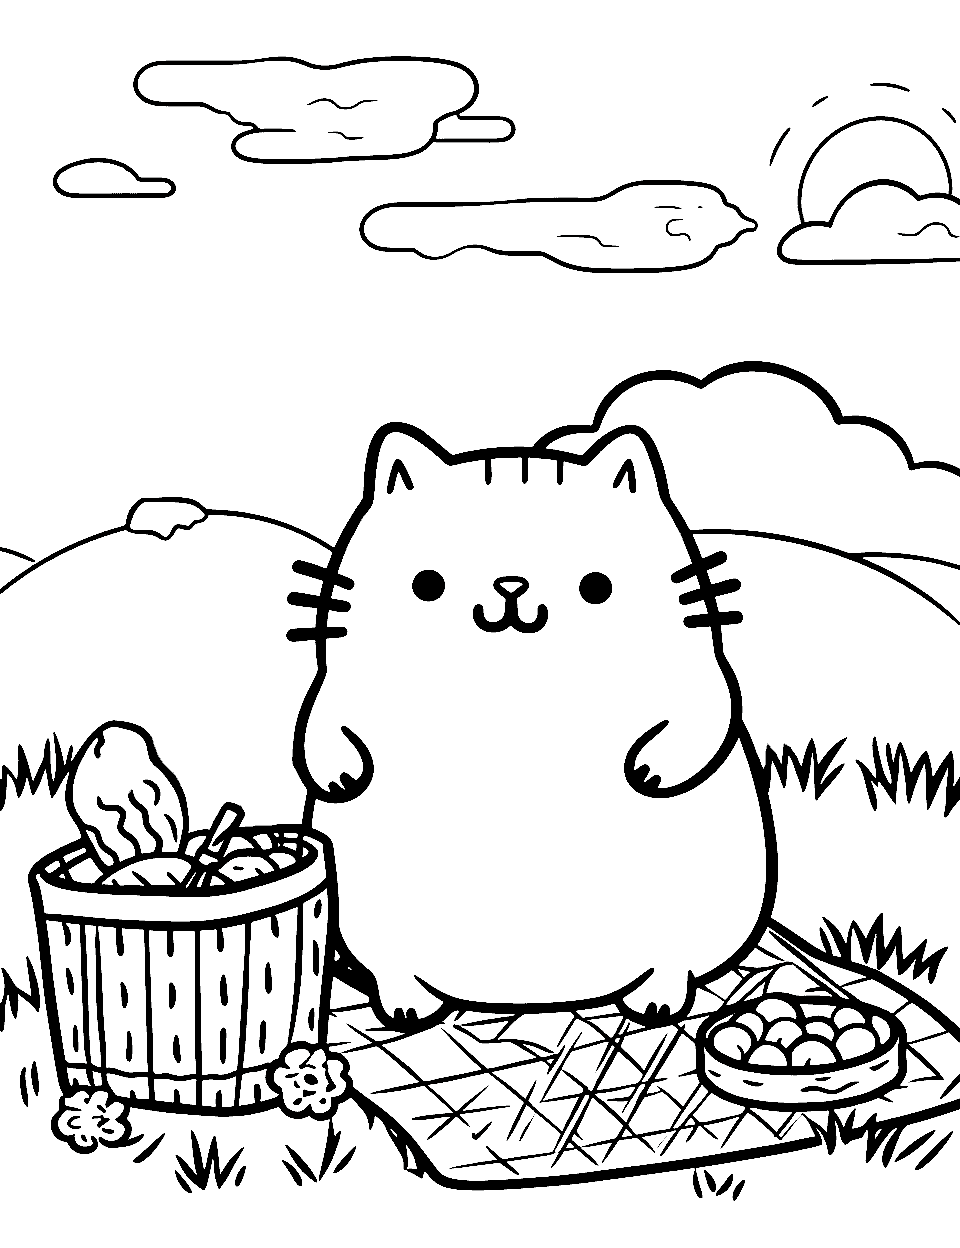 Sunny Day Picnic Coloring Page - Pusheen with a picnic basket in a field.